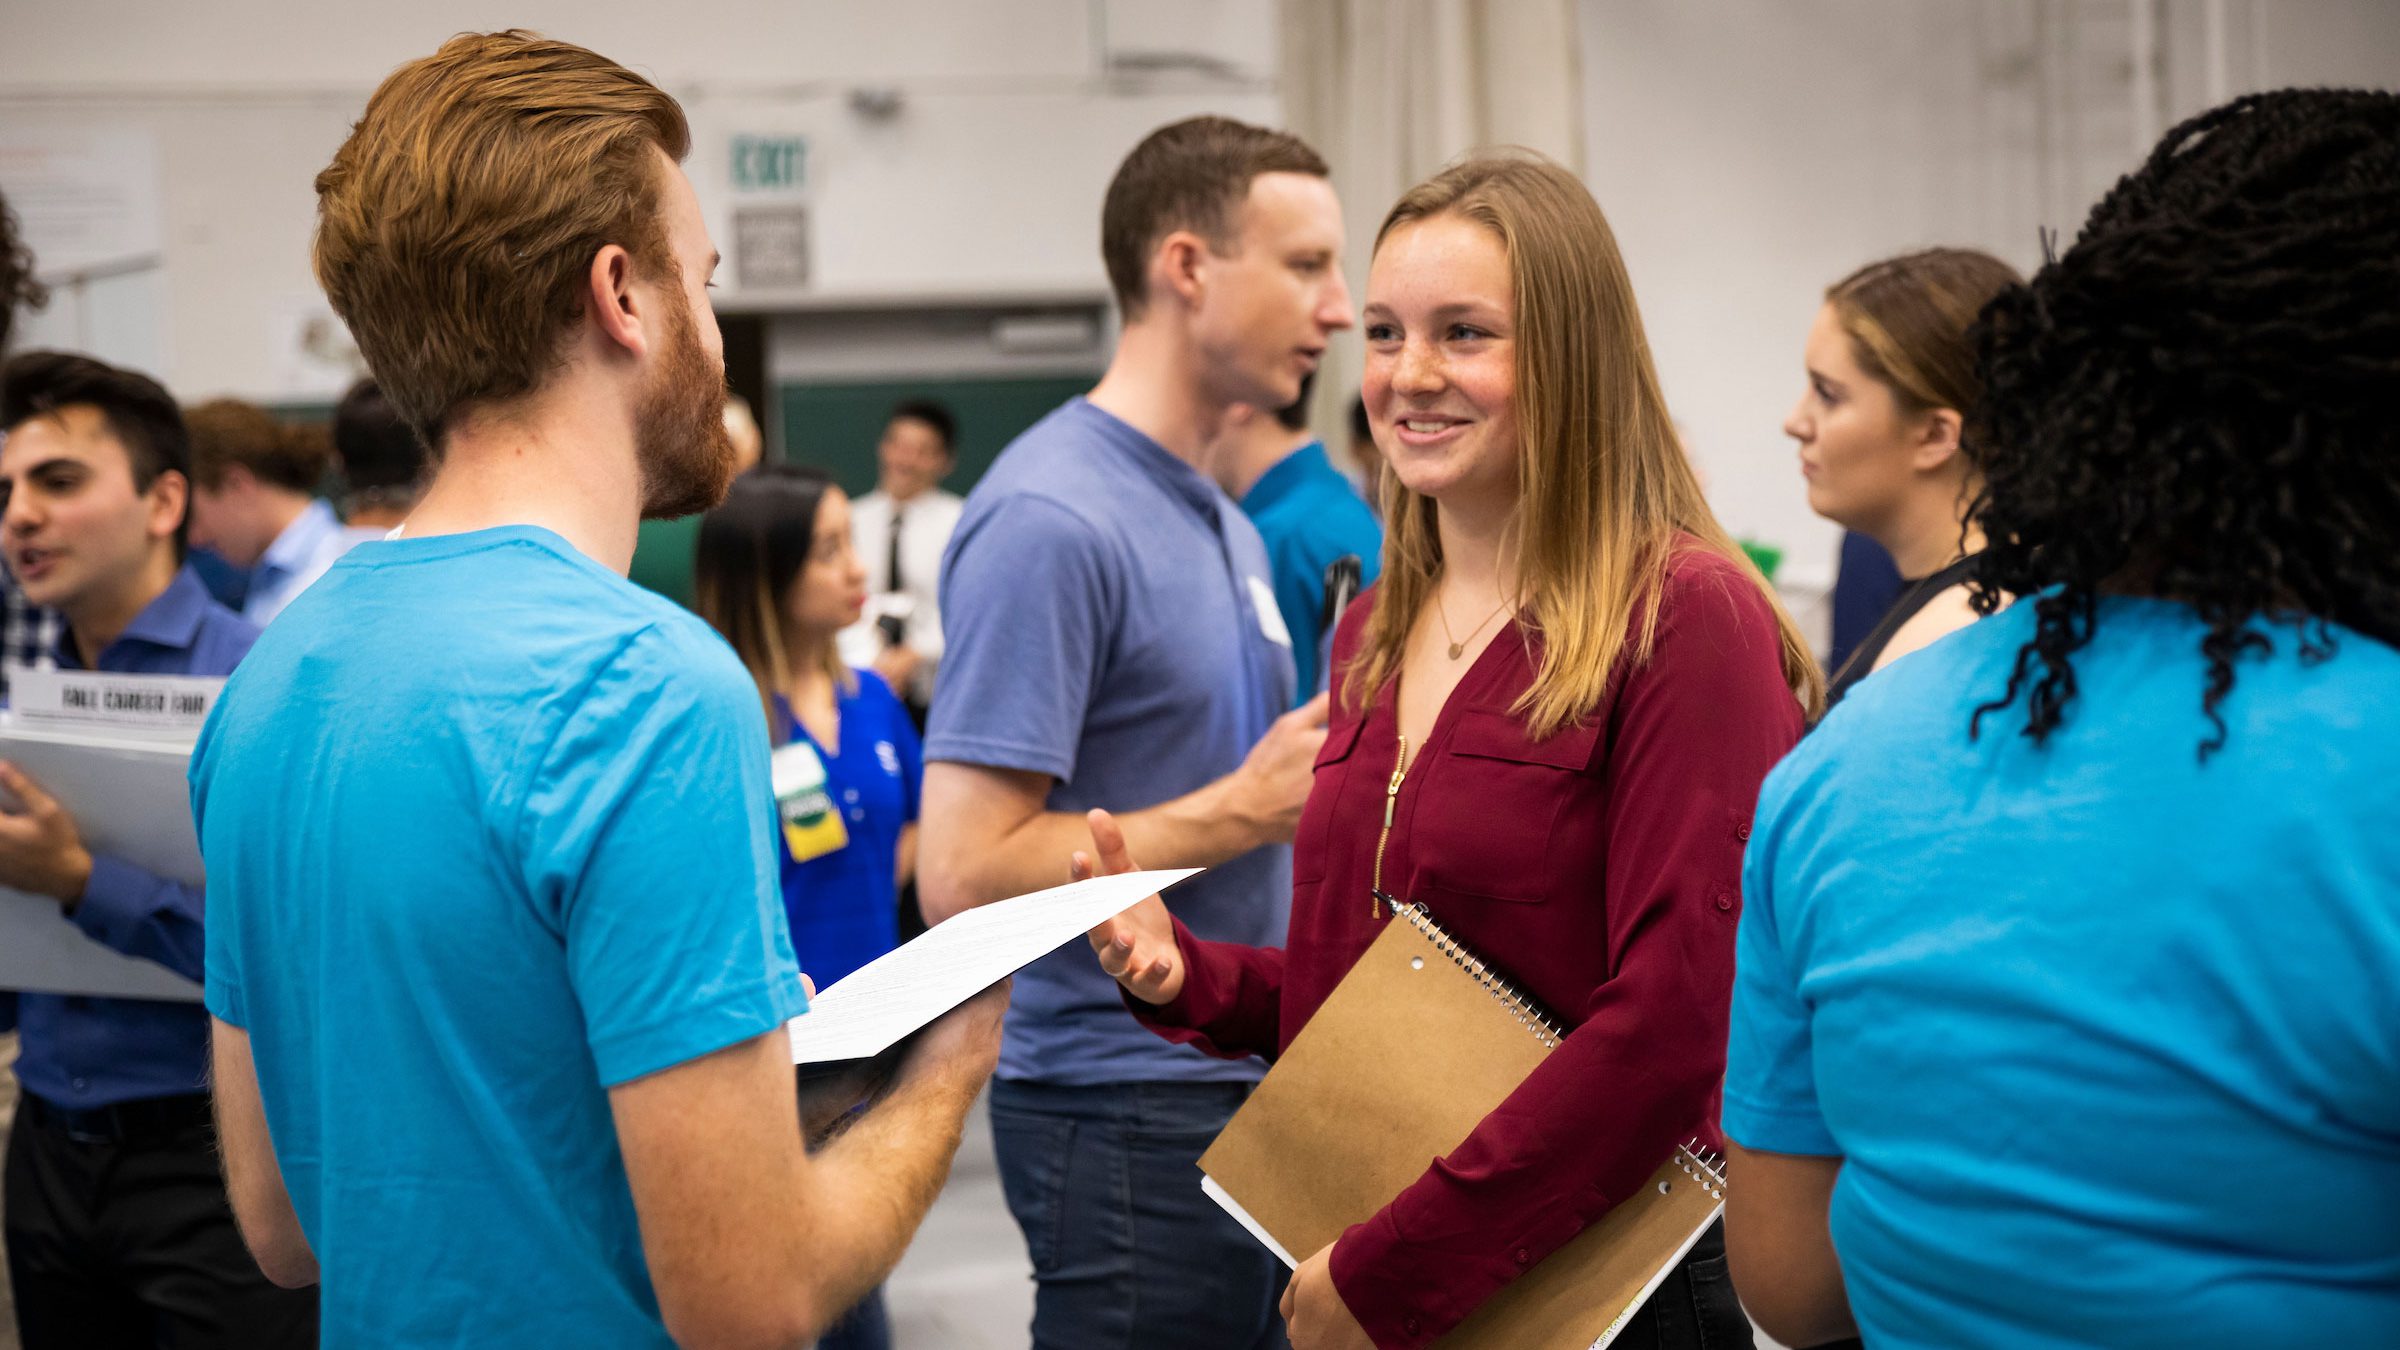 male and female student chat during a career fair